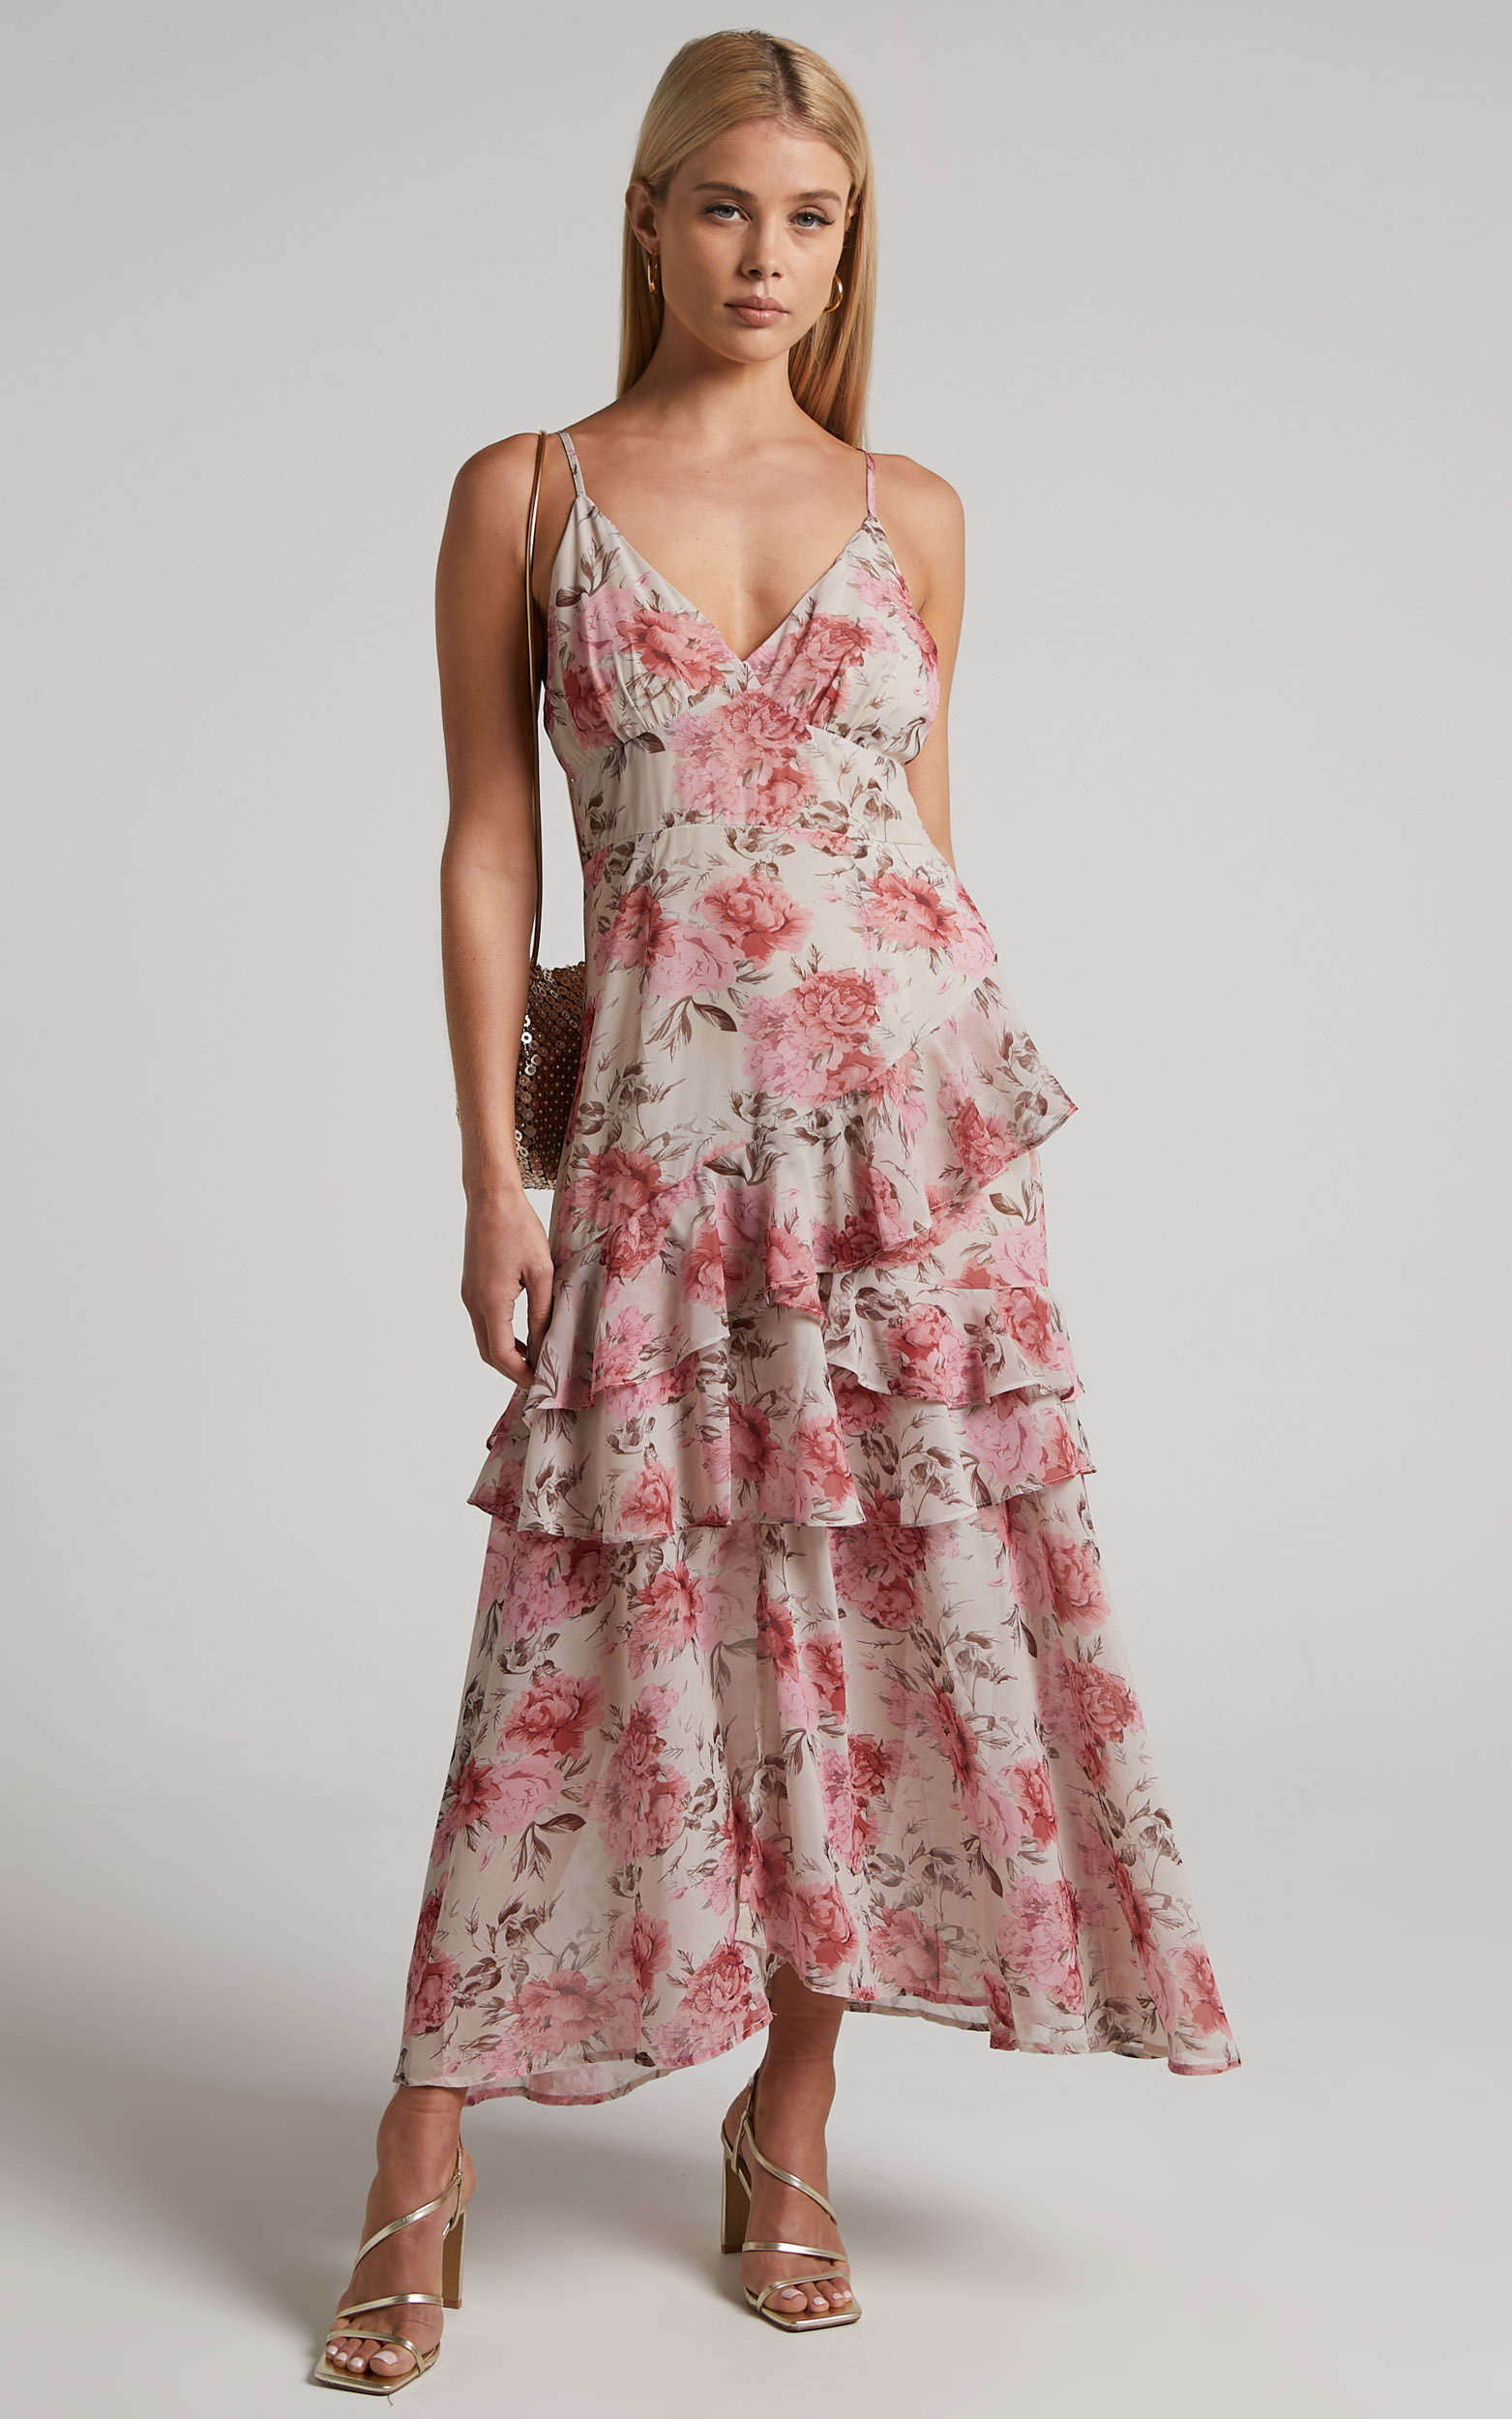 Caliope Maxi Dress - V Neck Tiered Ruffle Dress in Pink Floral - 06, PNK2, hi-res image number null